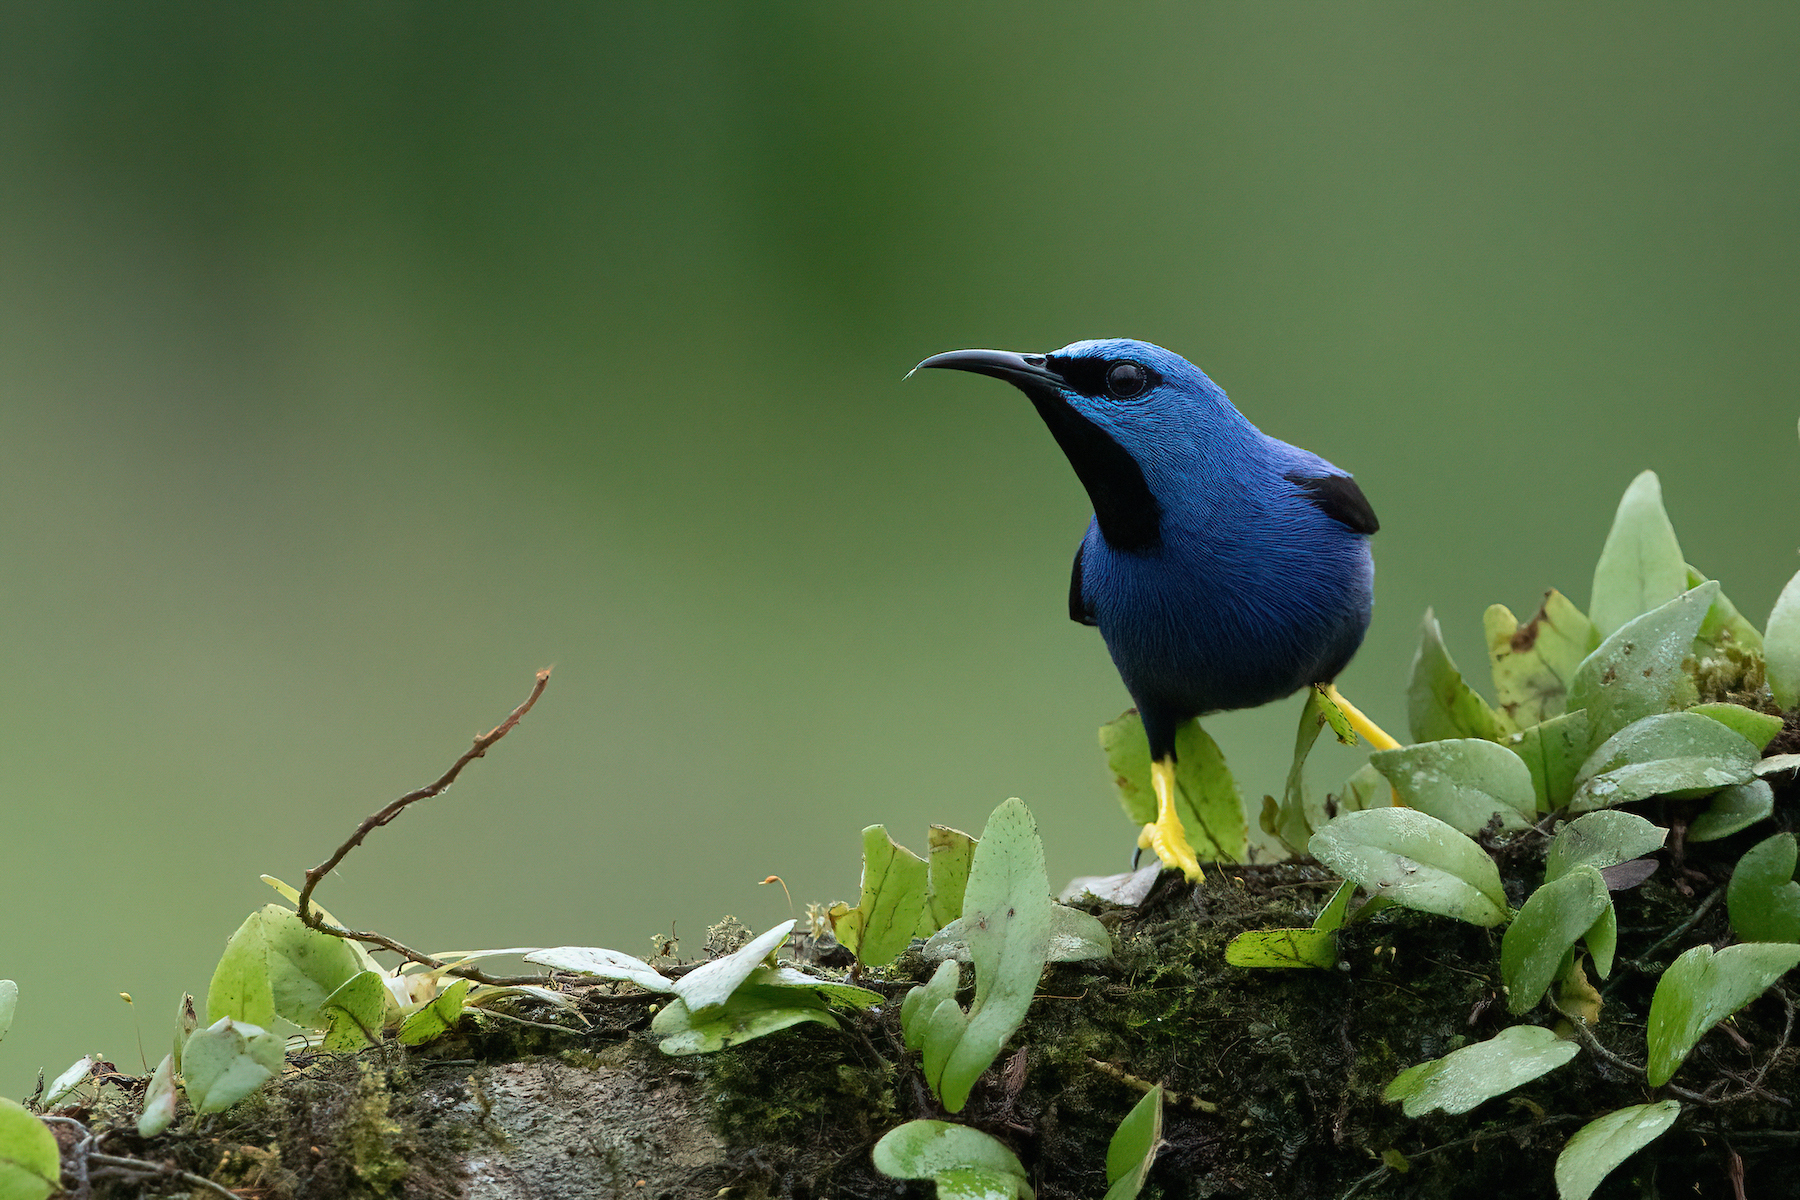 A male Shining Honeycreeper on our Costa Rica wildlife photography tour